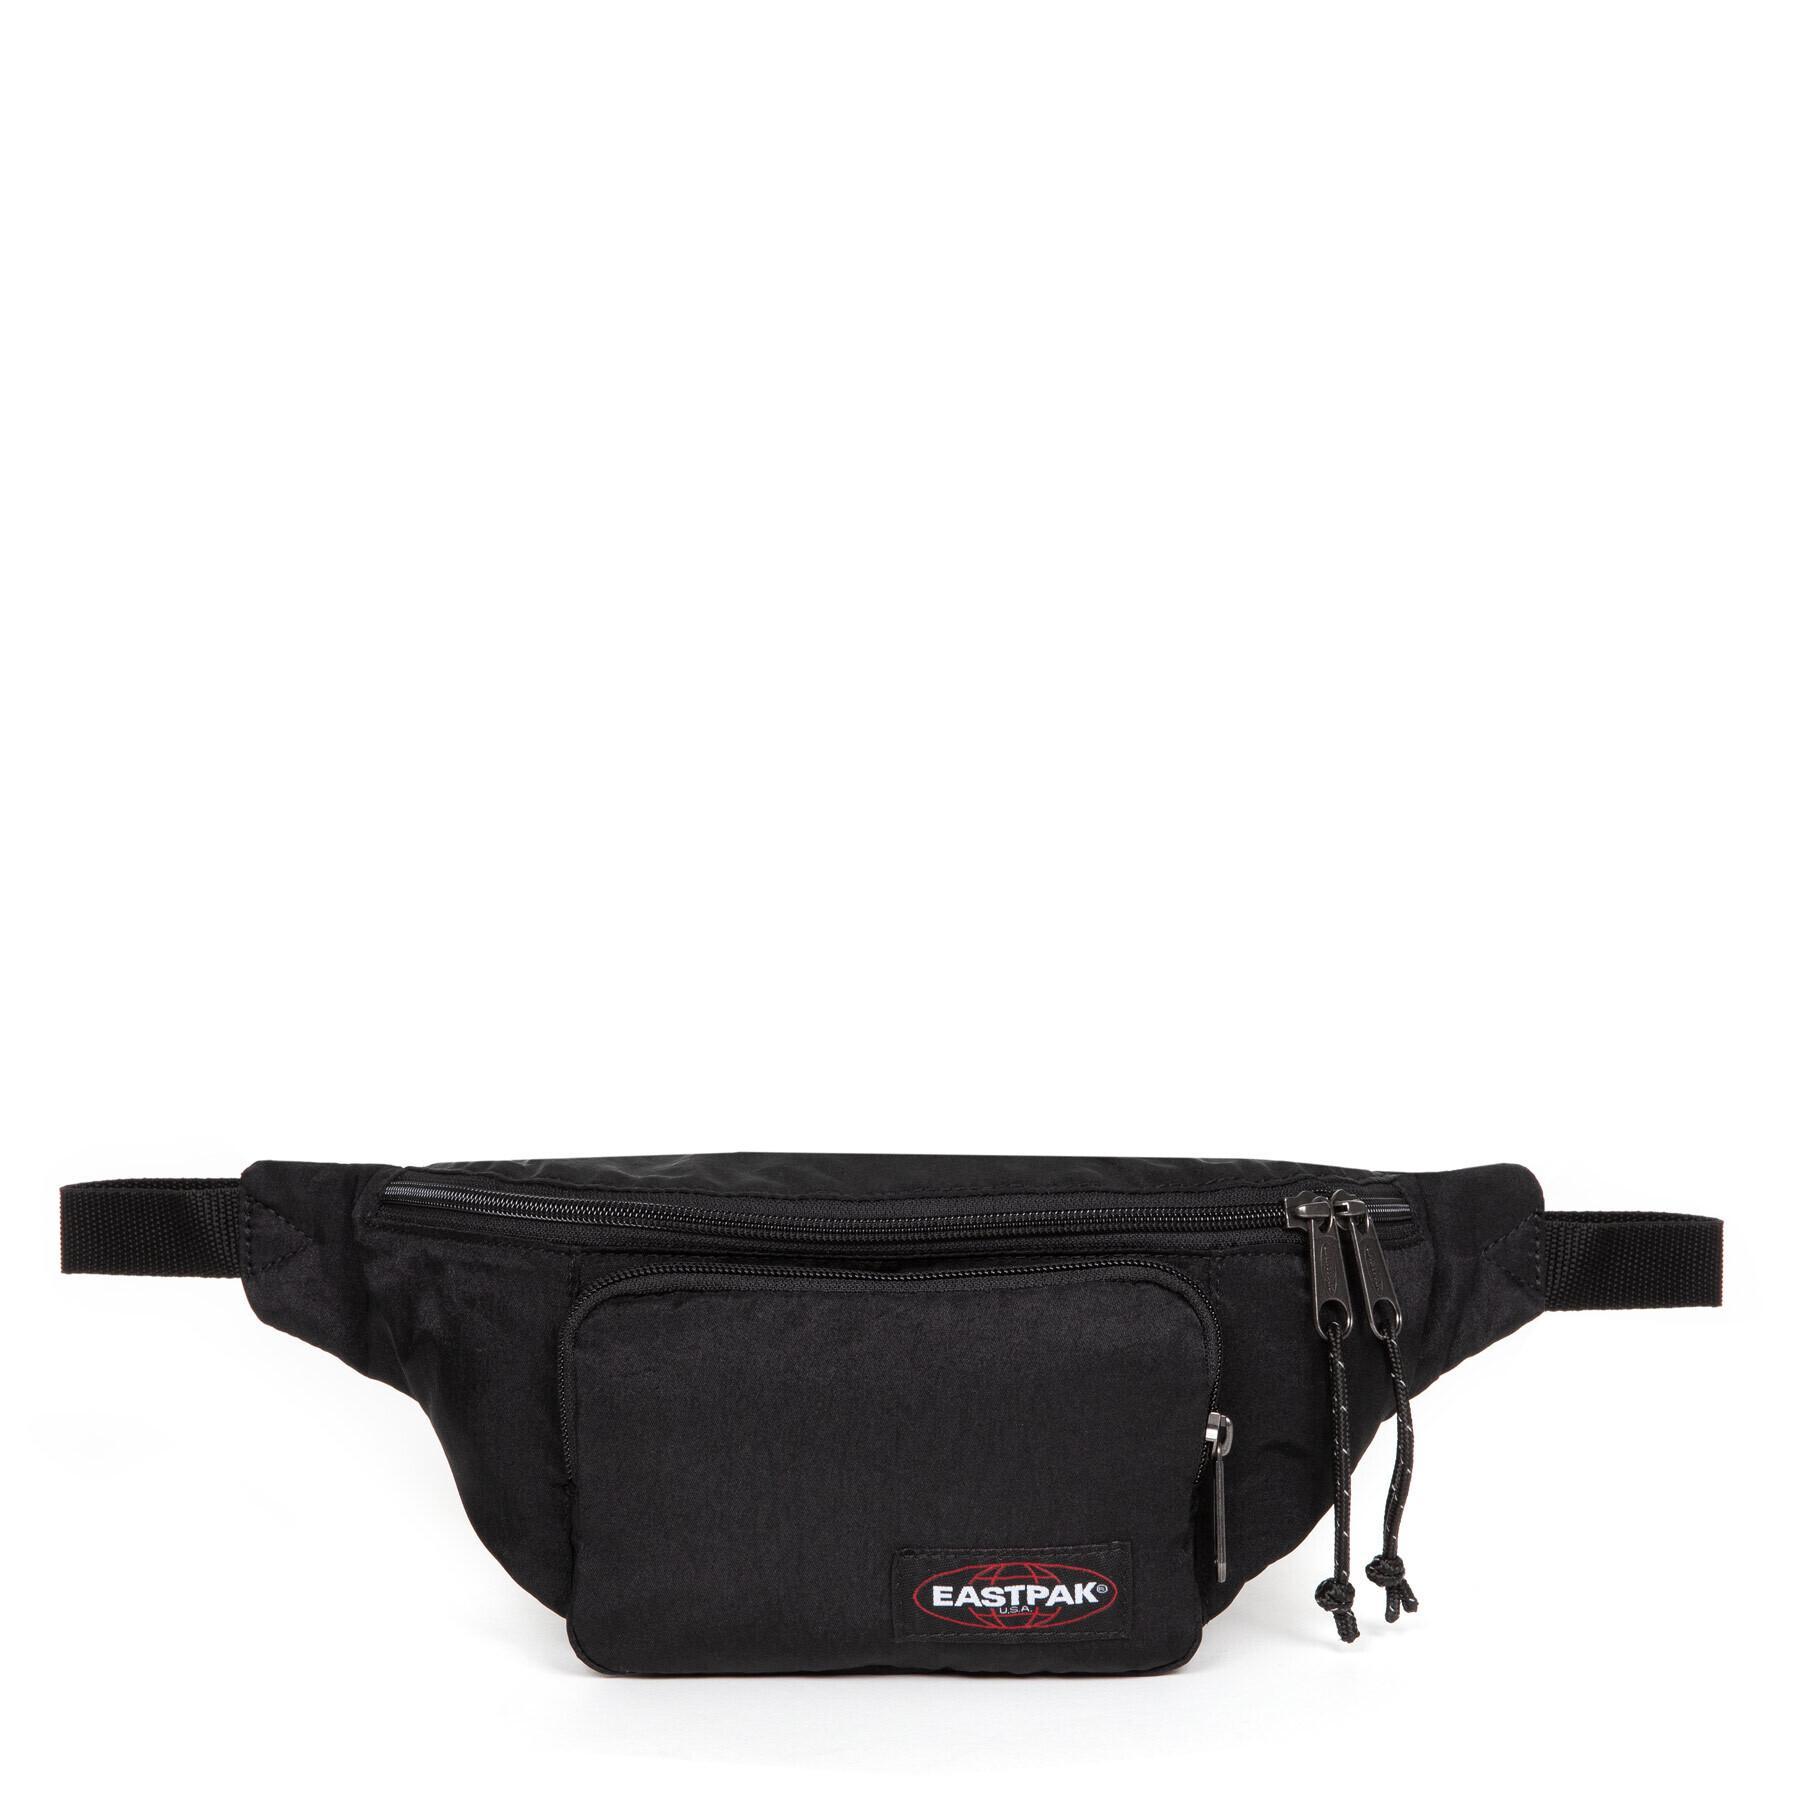 Fanny pack Eastpak Page